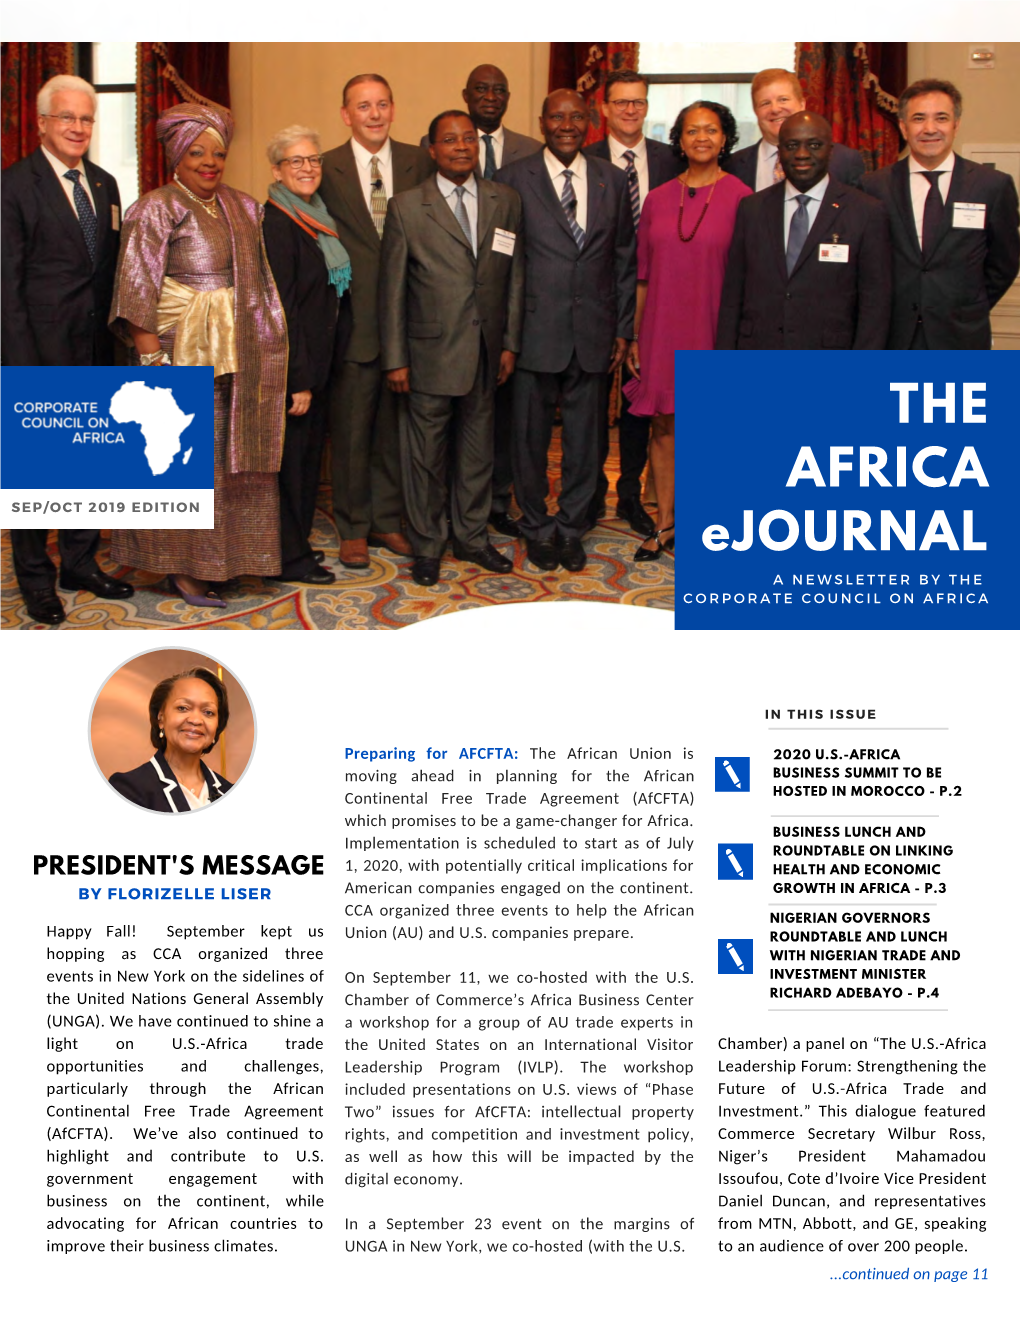 THE AFRICA Ejournal